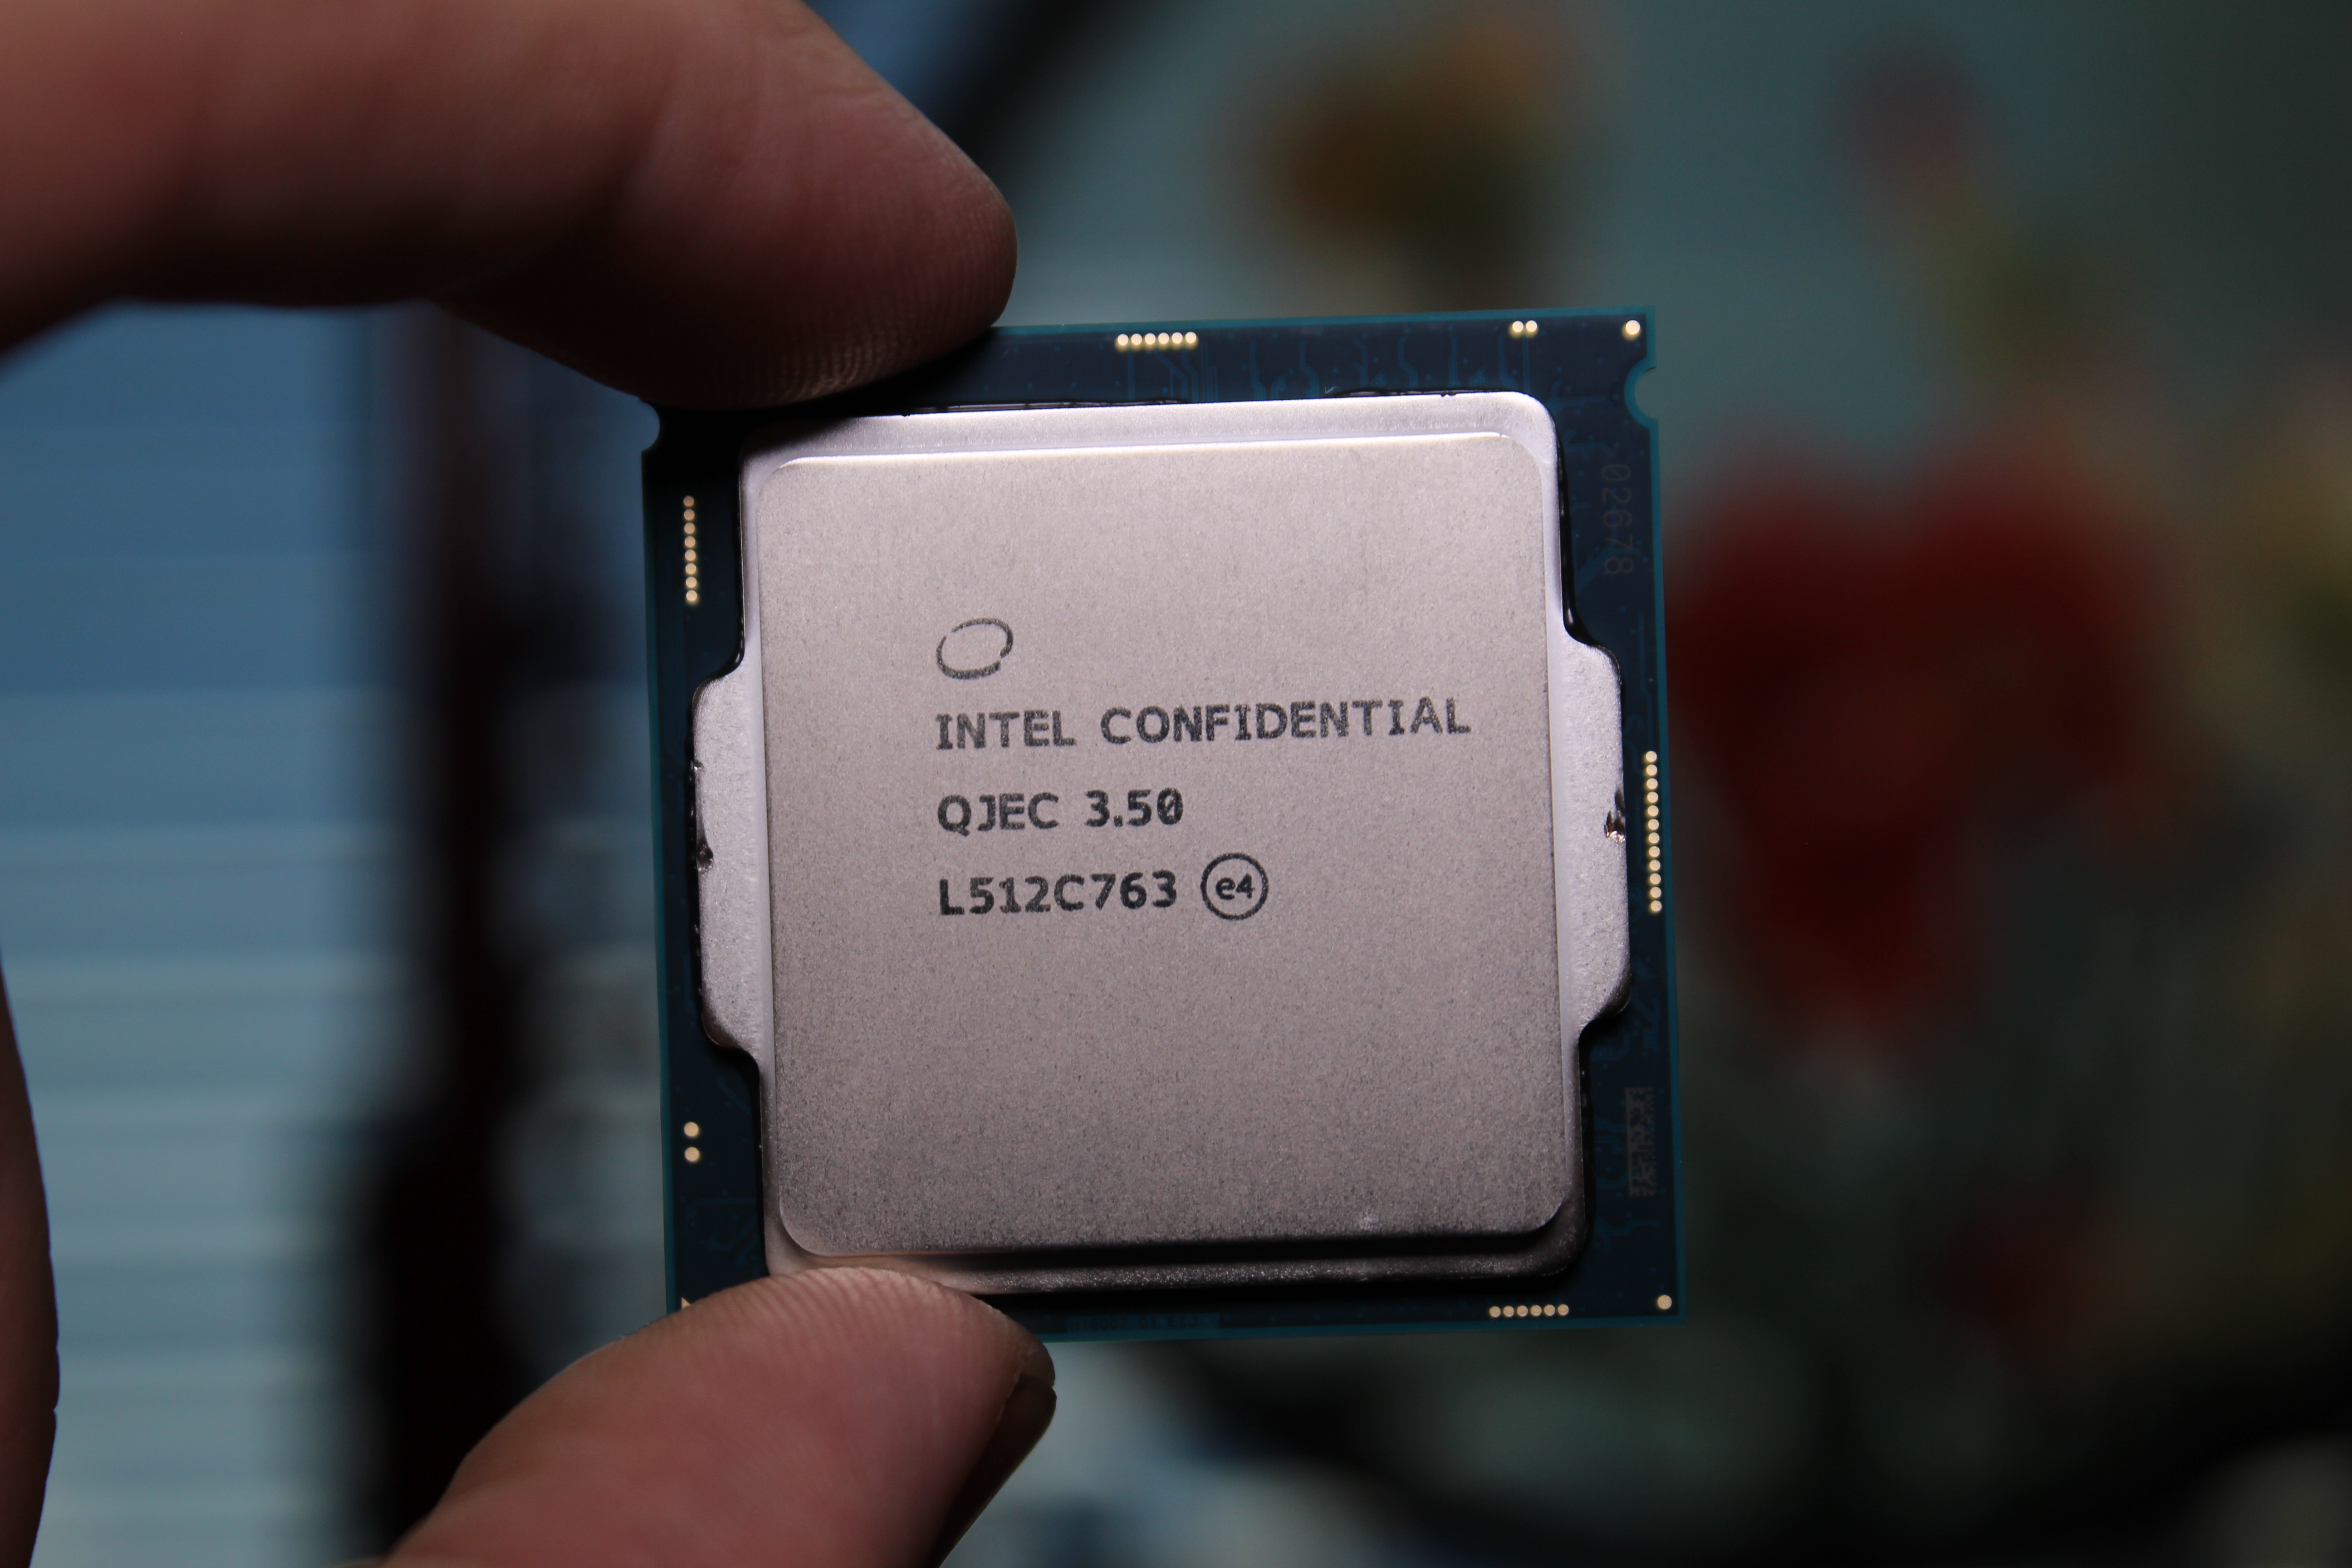 What You Can Buy: Gaming Benchmarks on High End GPUs - The Intel 6th Gen  Skylake Review: Core i7-6700K and i5-6600K Tested